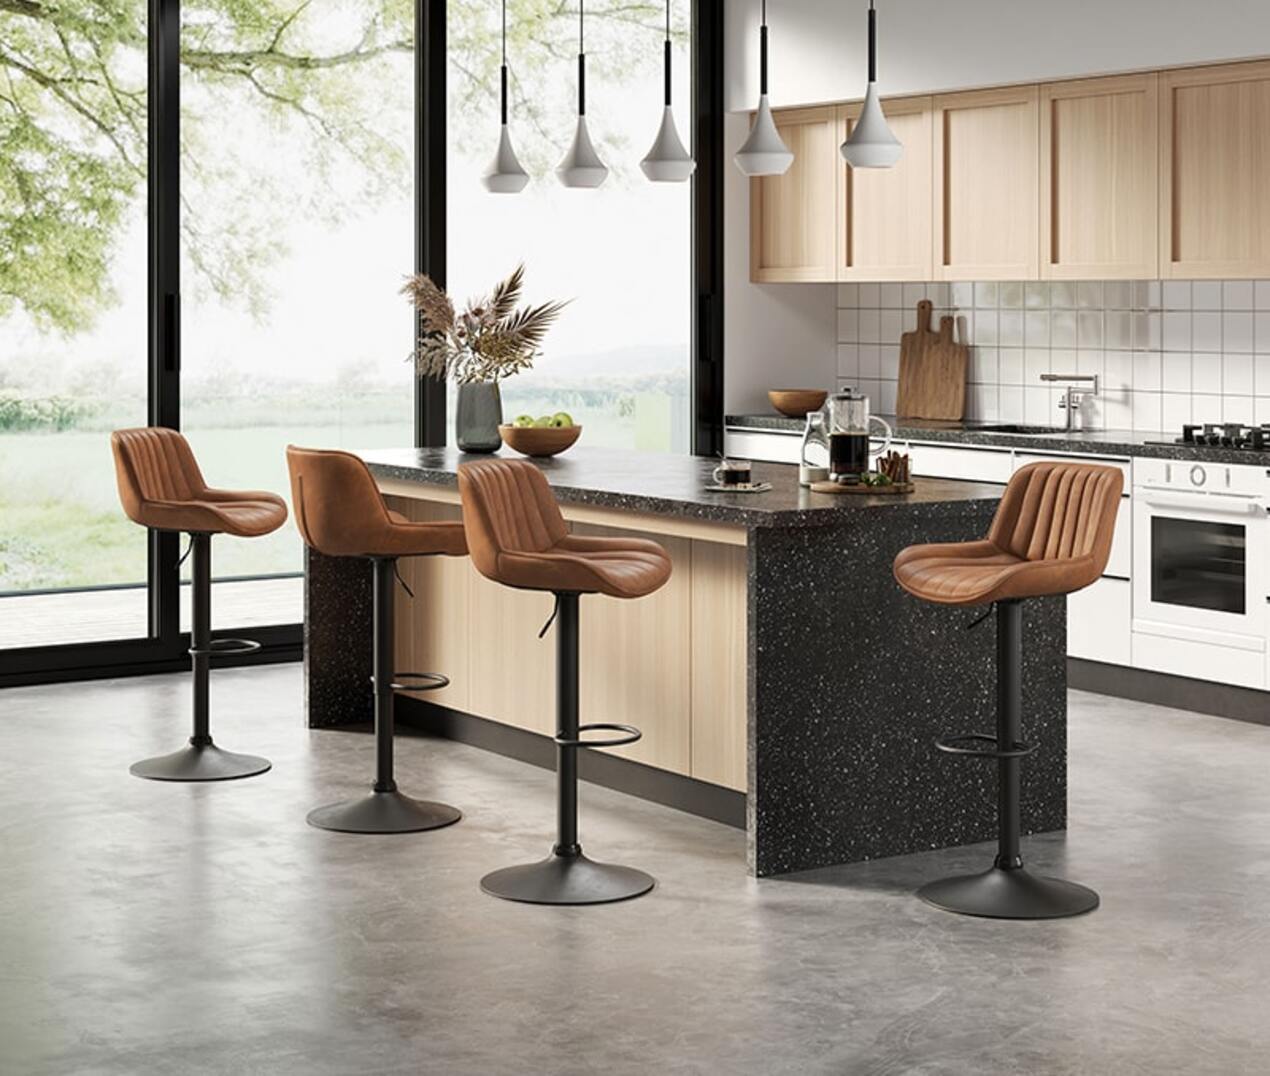 5 Creative Ideas To Use Bar Stool To Spice Up Different Spaces Of The House